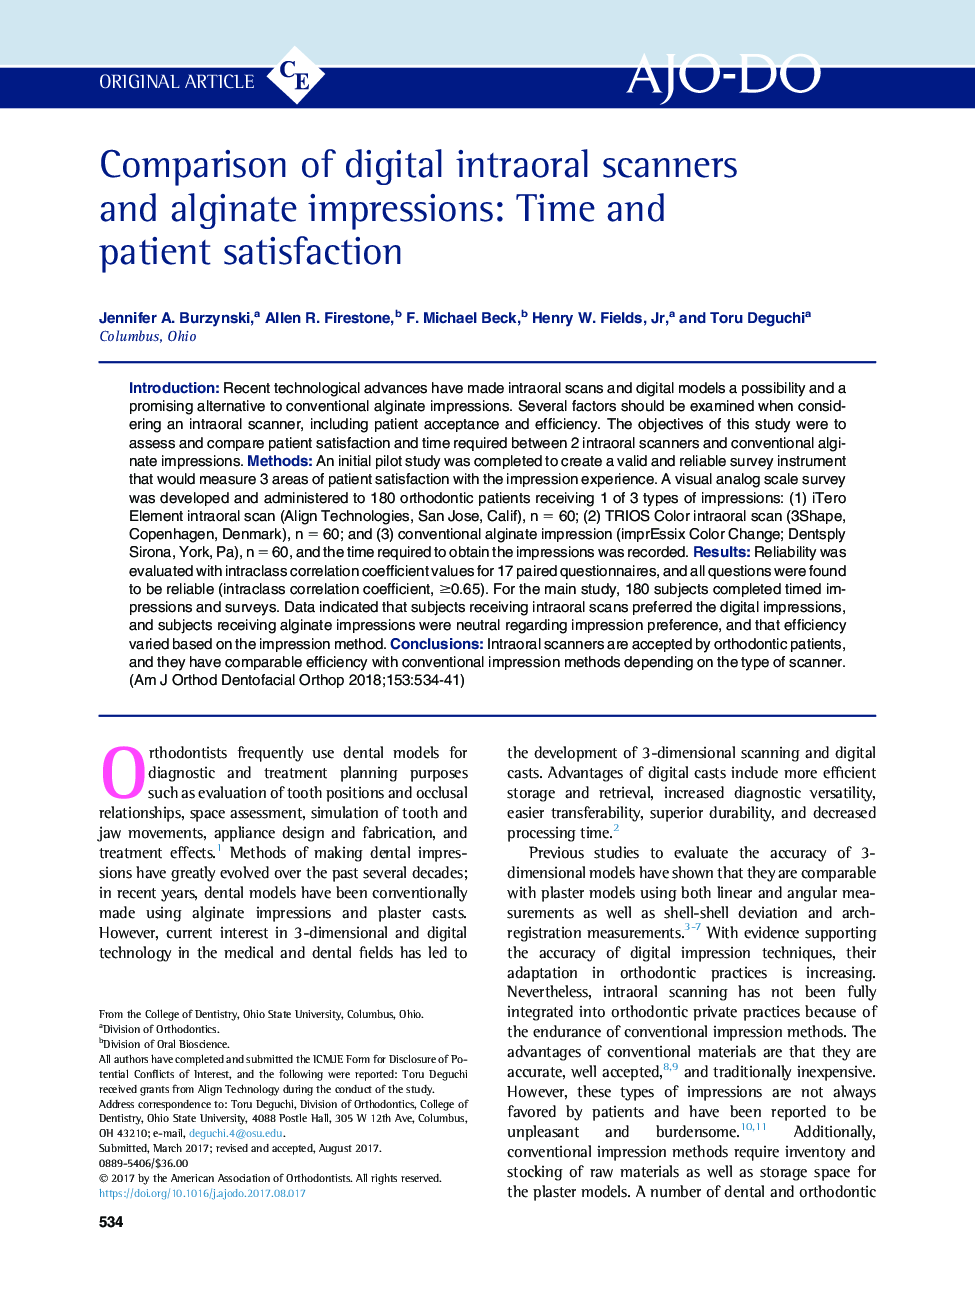 Comparison of digital intraoral scanners and alginate impressions: Time and patient satisfaction